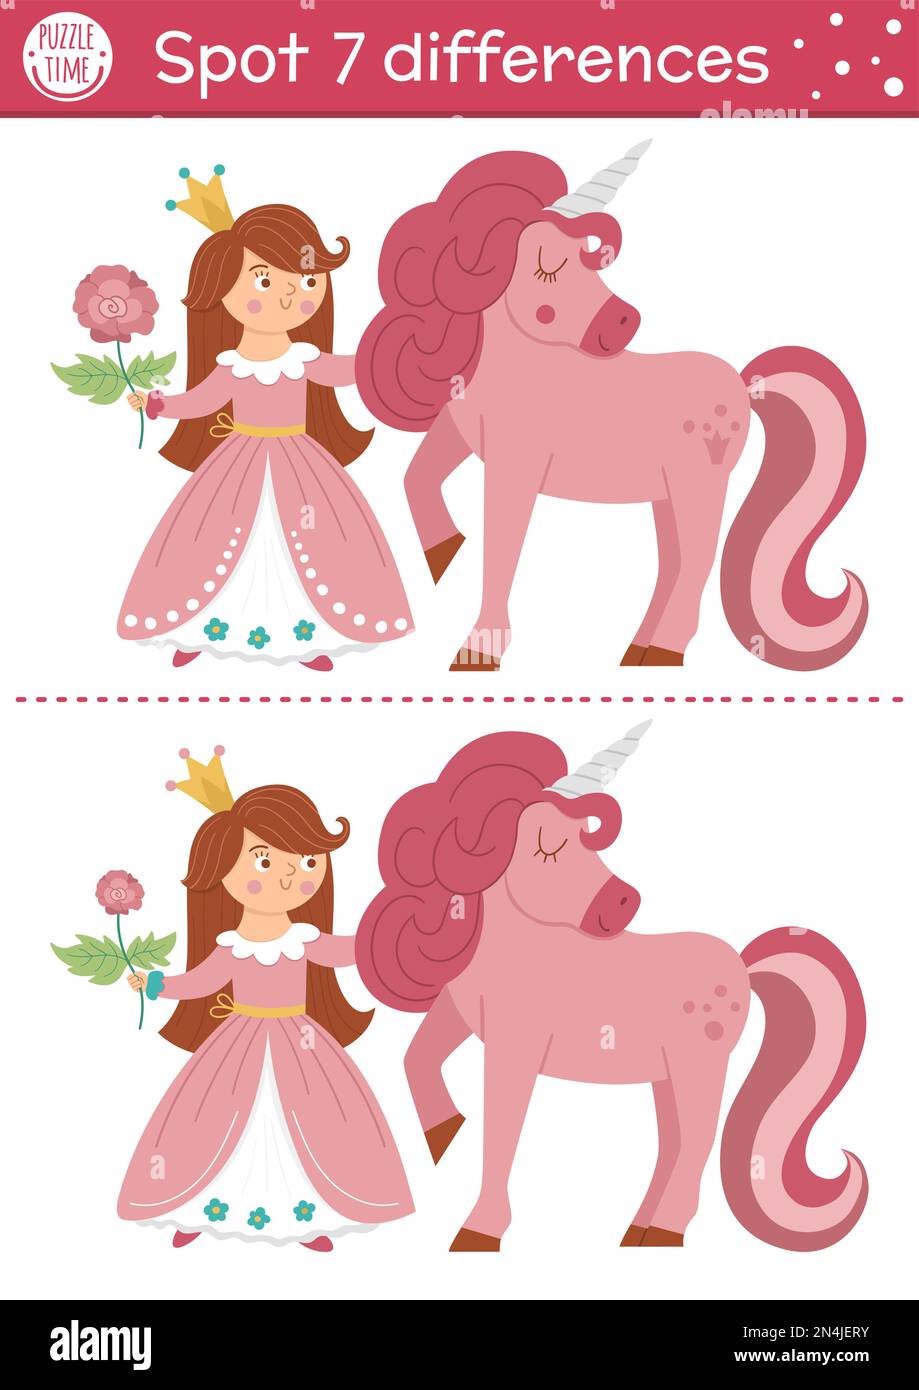 Find differences game for children. Fairytale educational activity with cute princess and unicorn. Magic kingdom puzzle for kids with fantasy characte Stock Vector